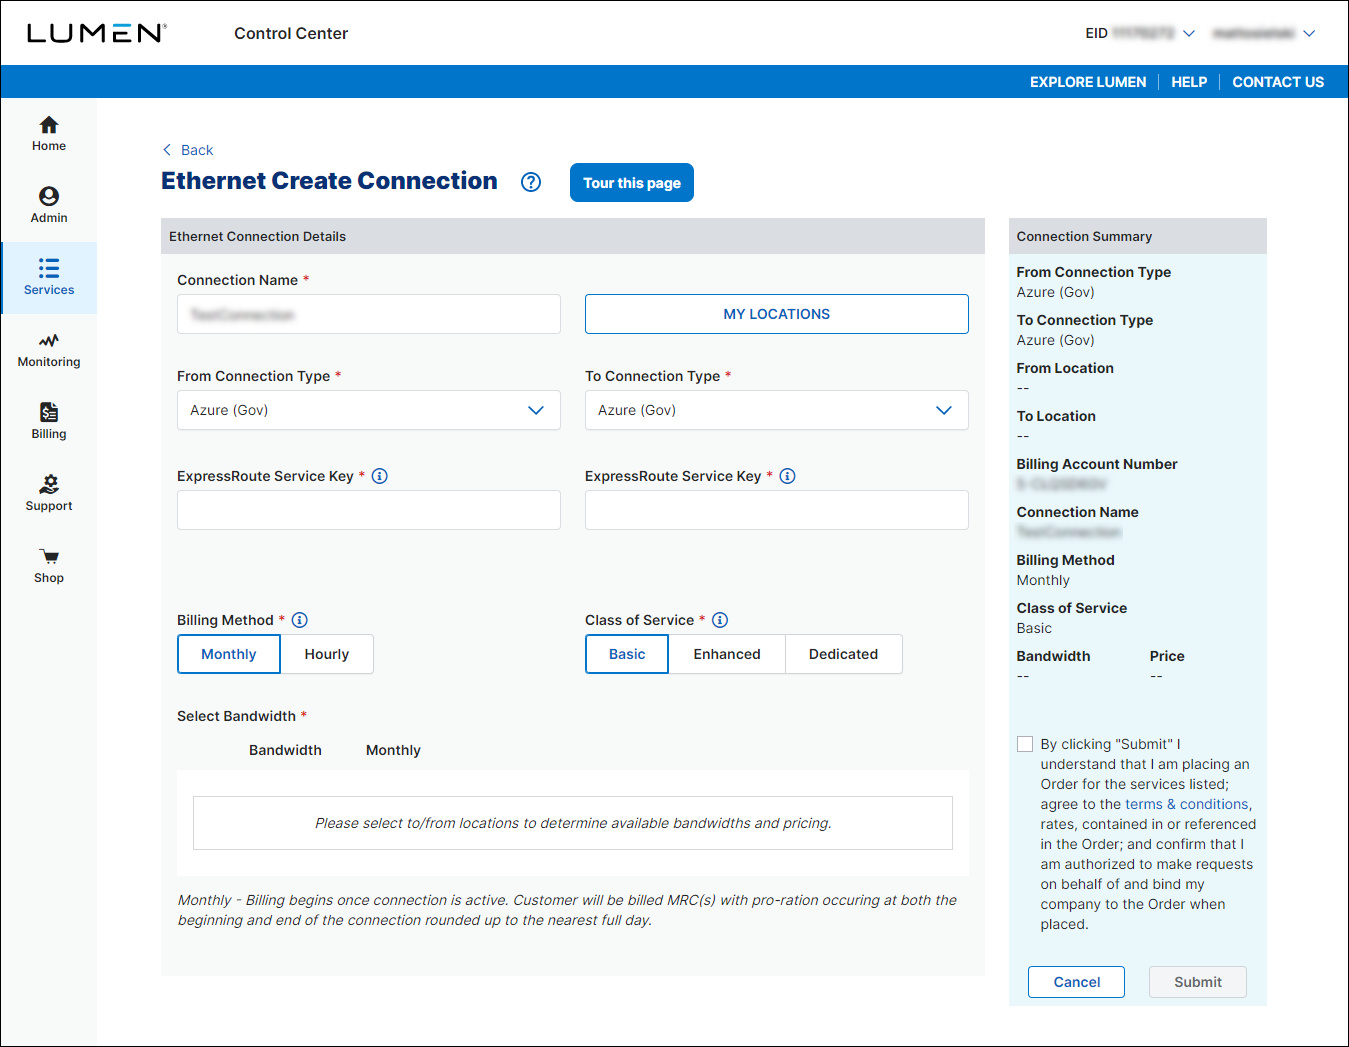 Ethernet Create Connection (showing a connection from Azure Gov to Azure Gov)